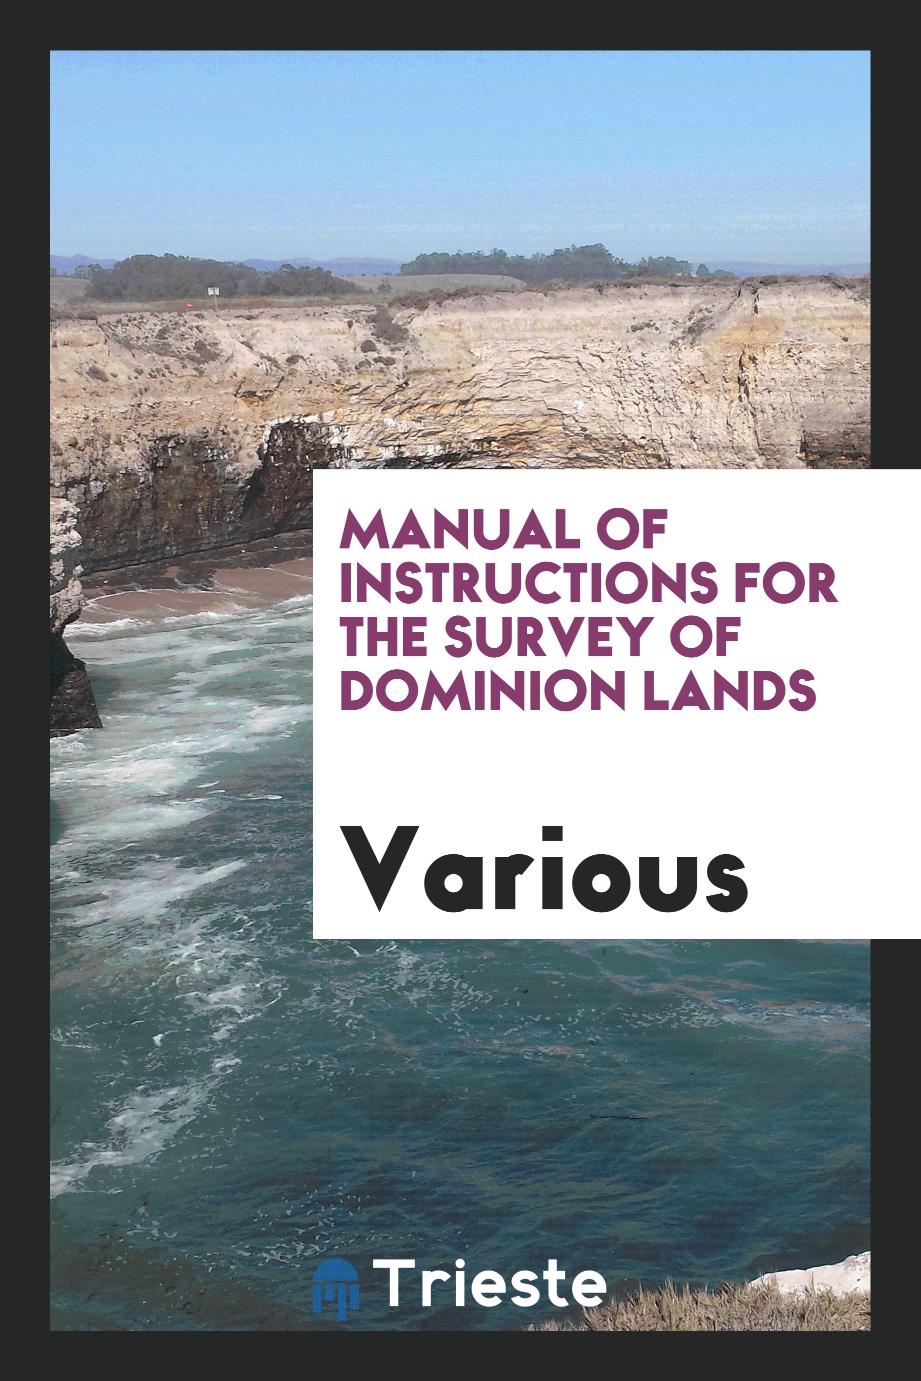 Manual of instructions for the survey of Dominion lands